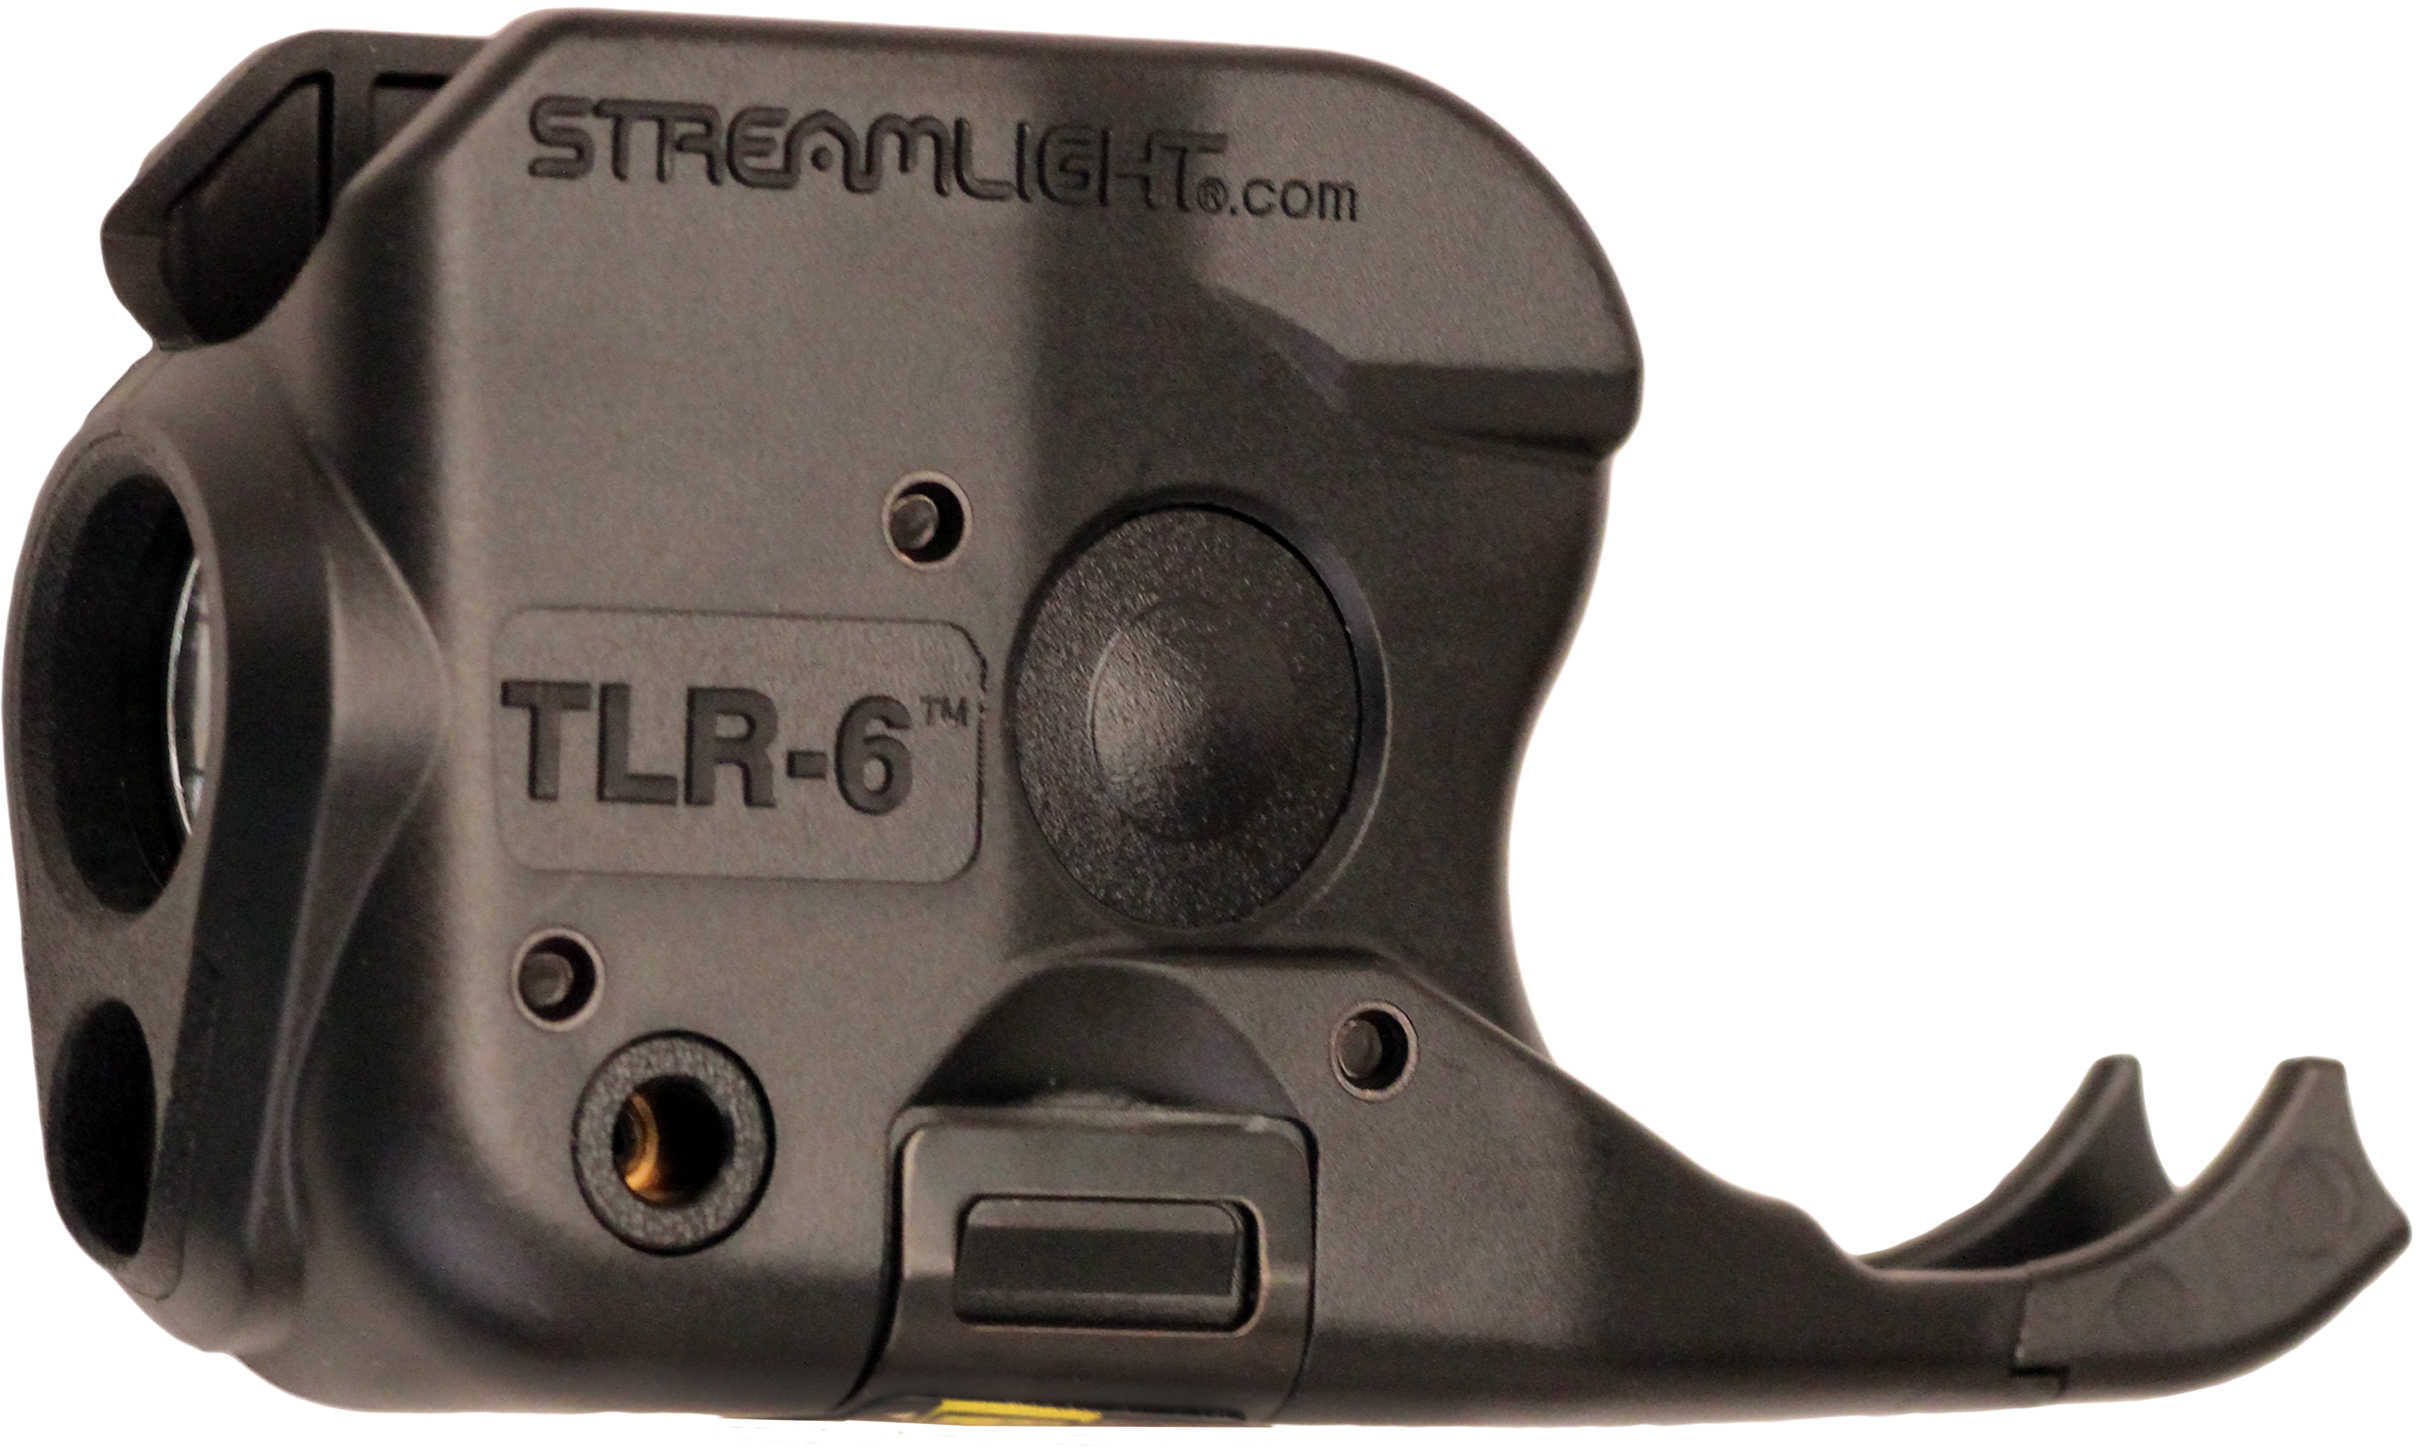 Streamlight TLR-6 Rail Mounted LED Tactical Light with Red Laser 100 Lumen SIG Sauer P238/P938